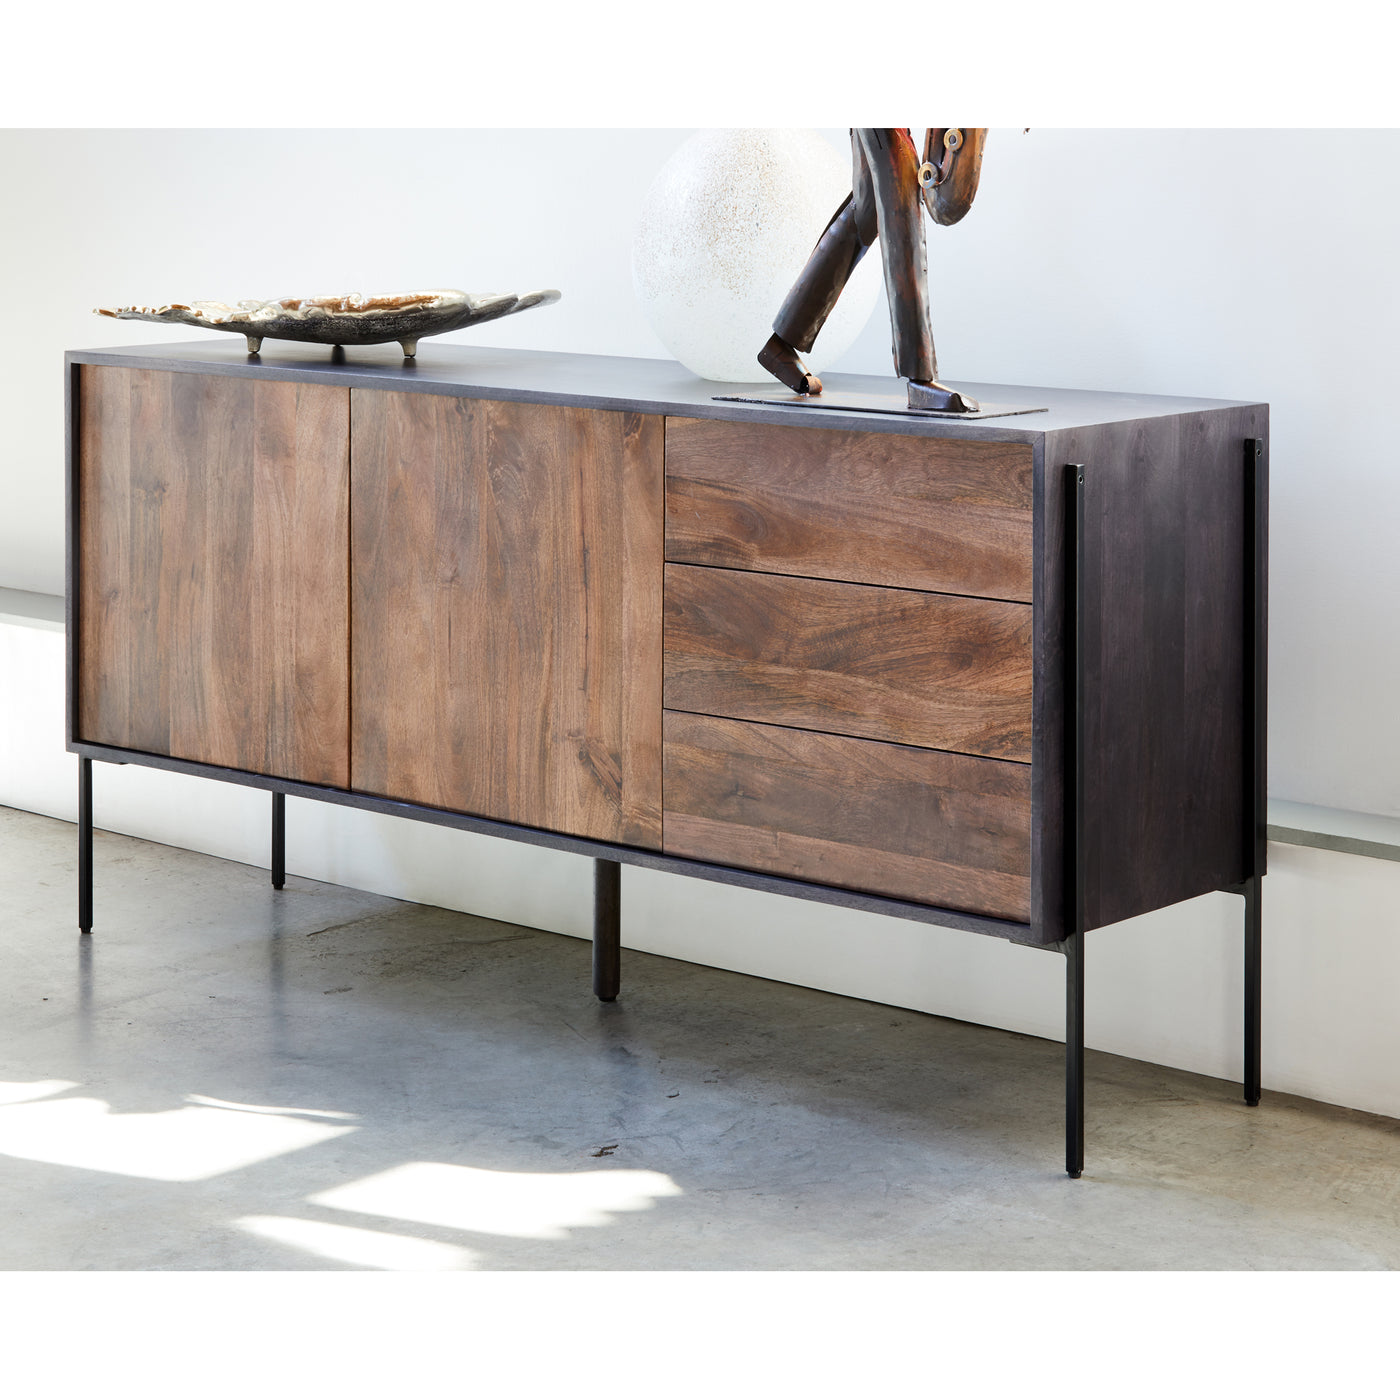 Minimalism meets industrial design with the Tobin Sideboard. Store your dinnerware on two spacious shelves and your silver...